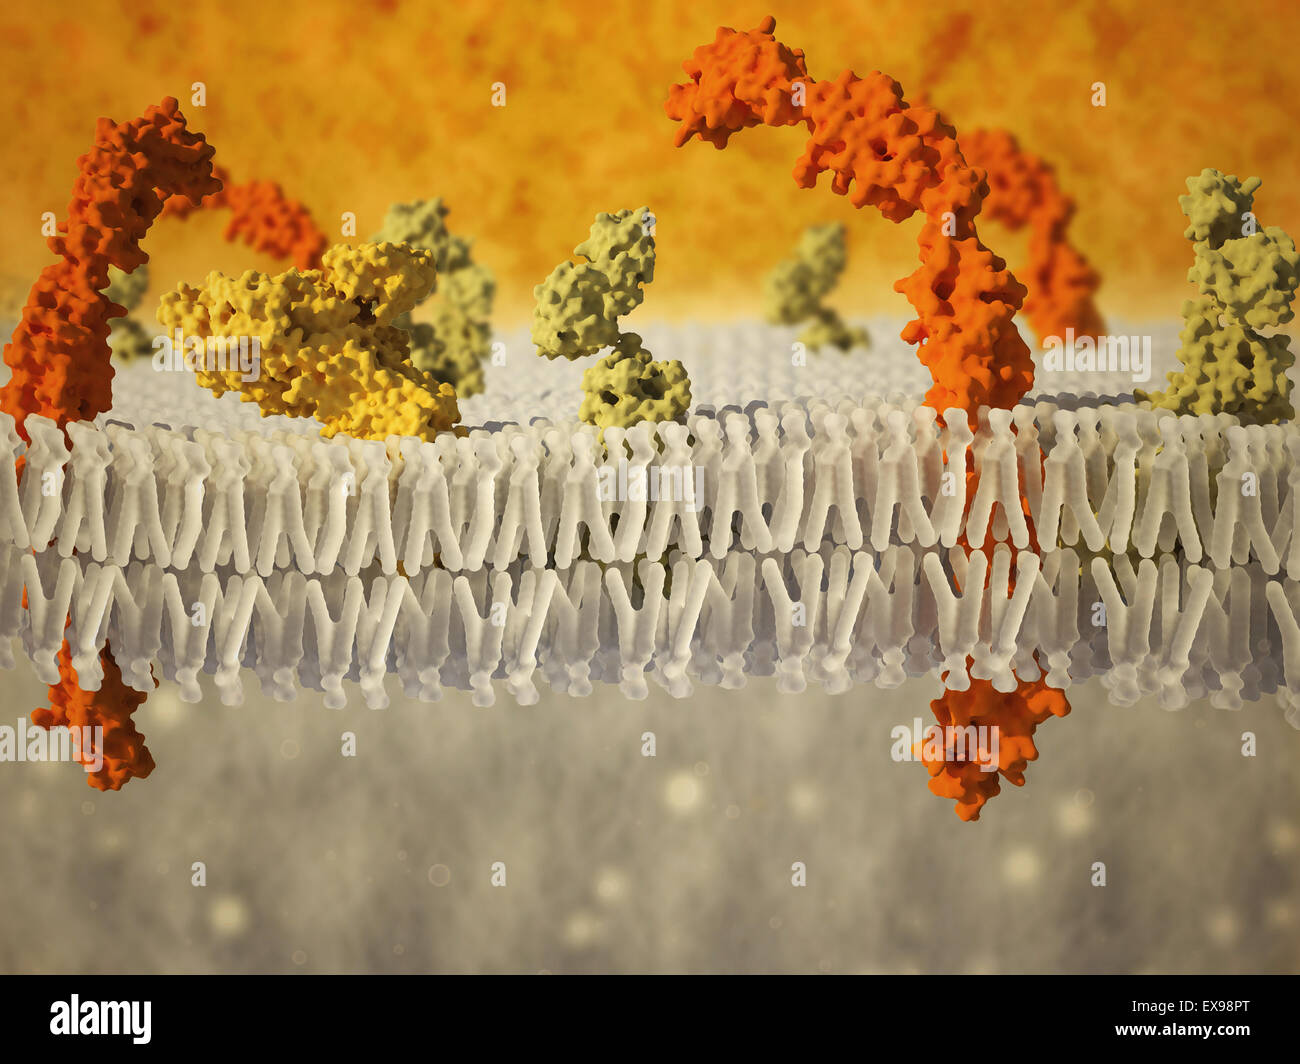 Phospholipid bilayer of the cell membrane. Stock Photo